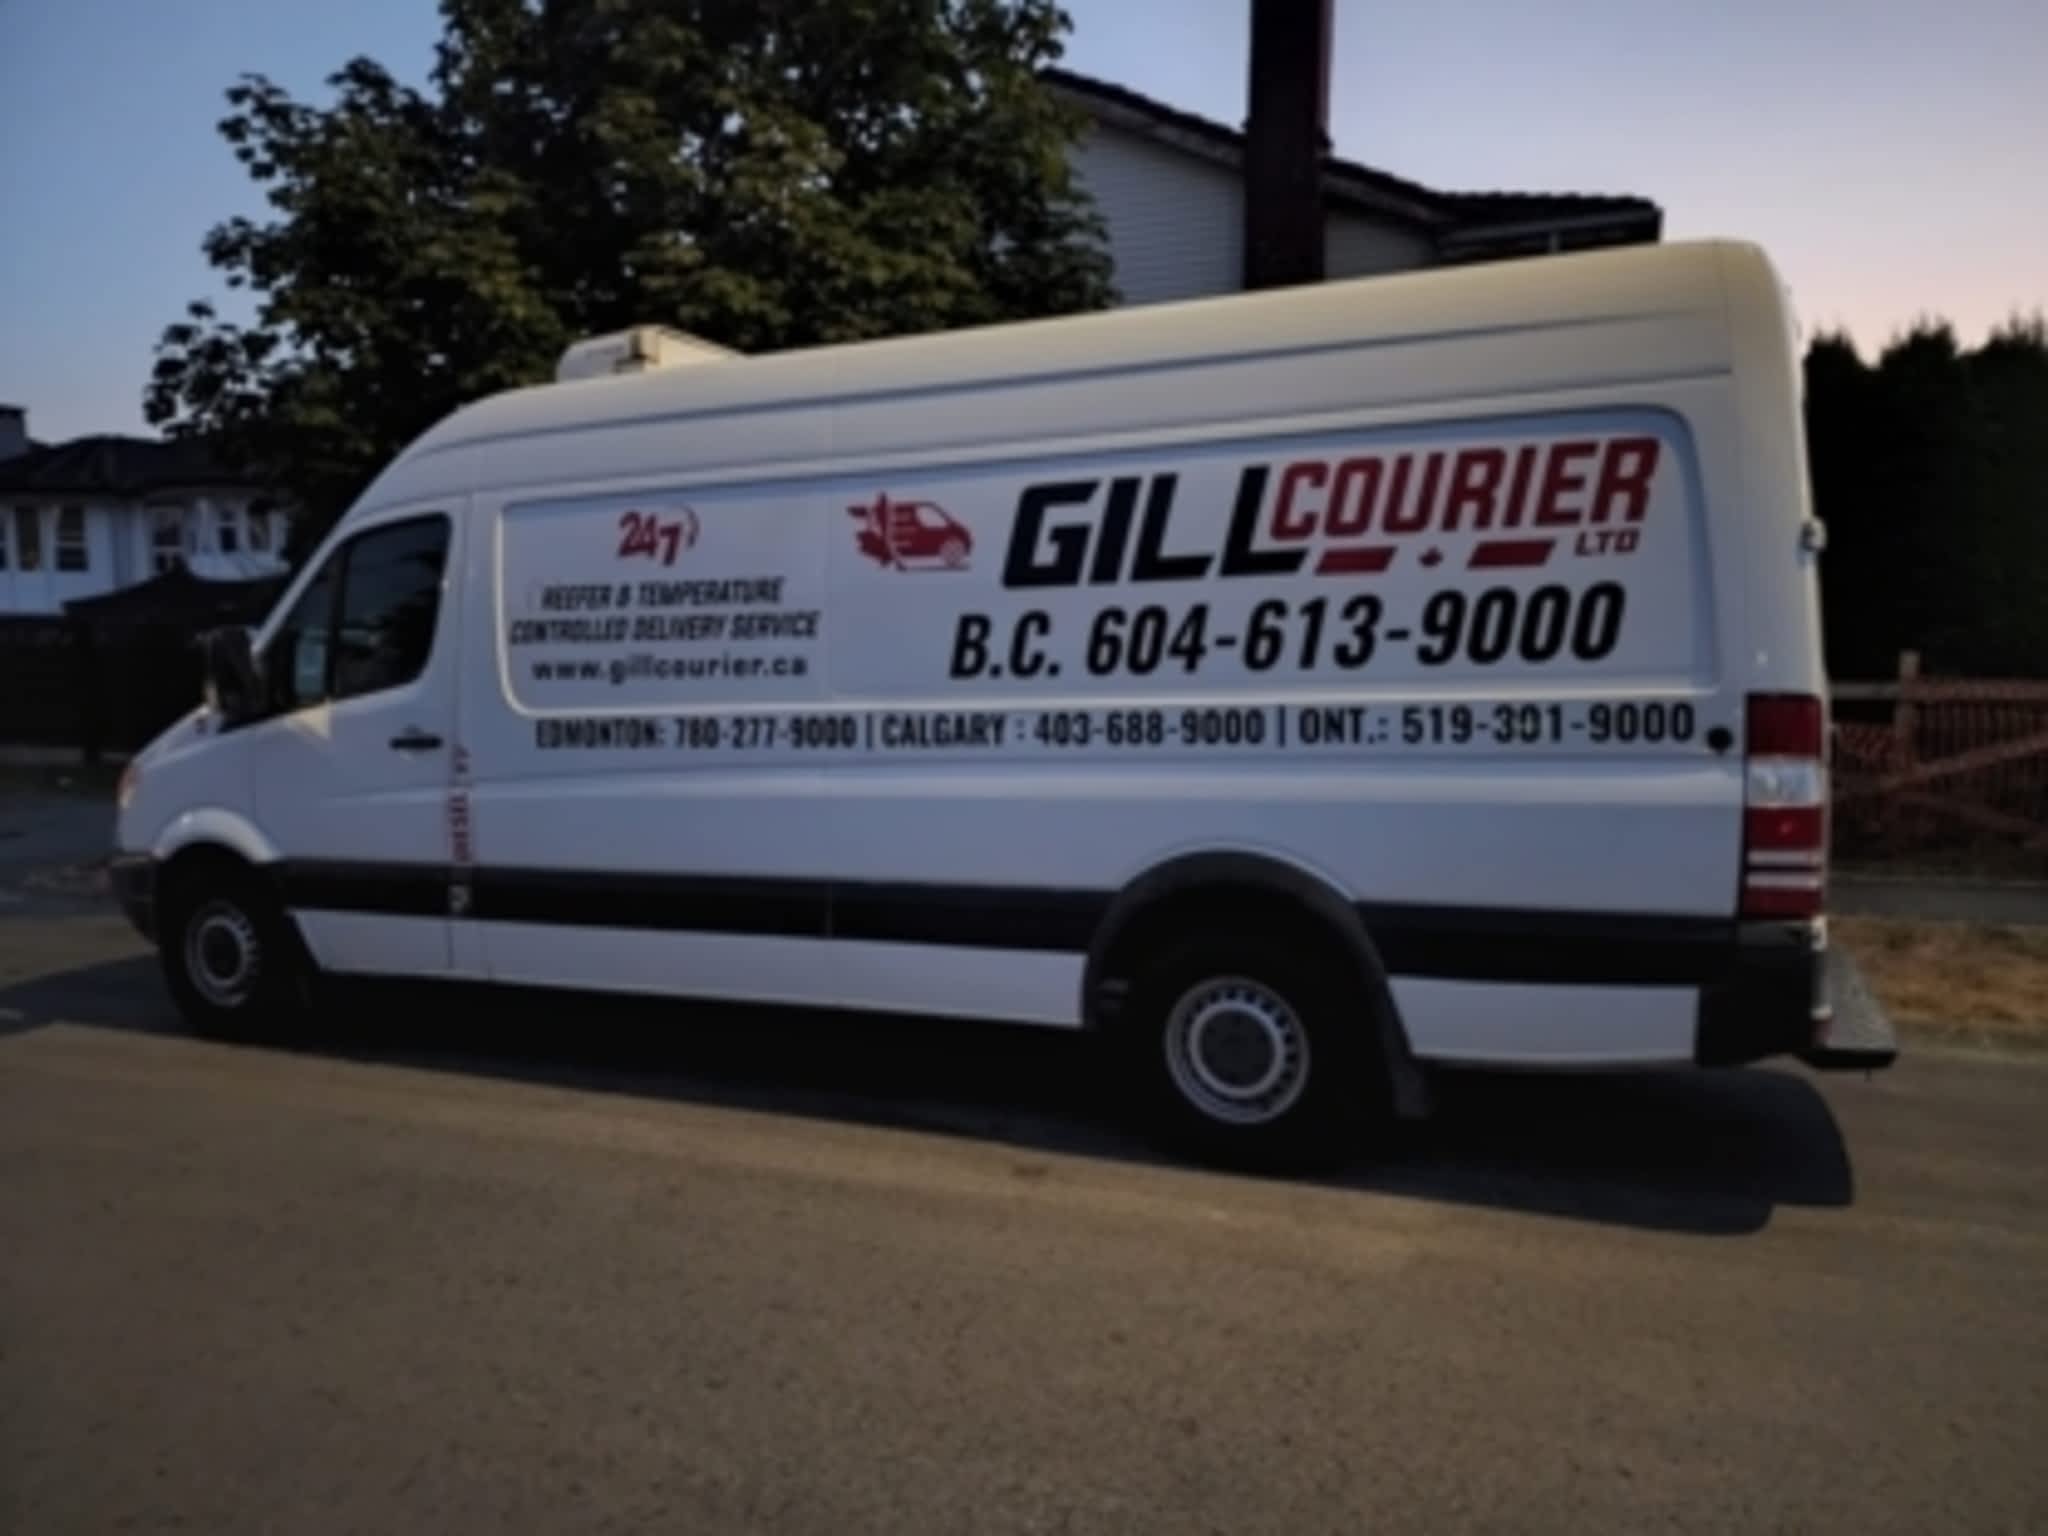 photo Gill Courier Ltd